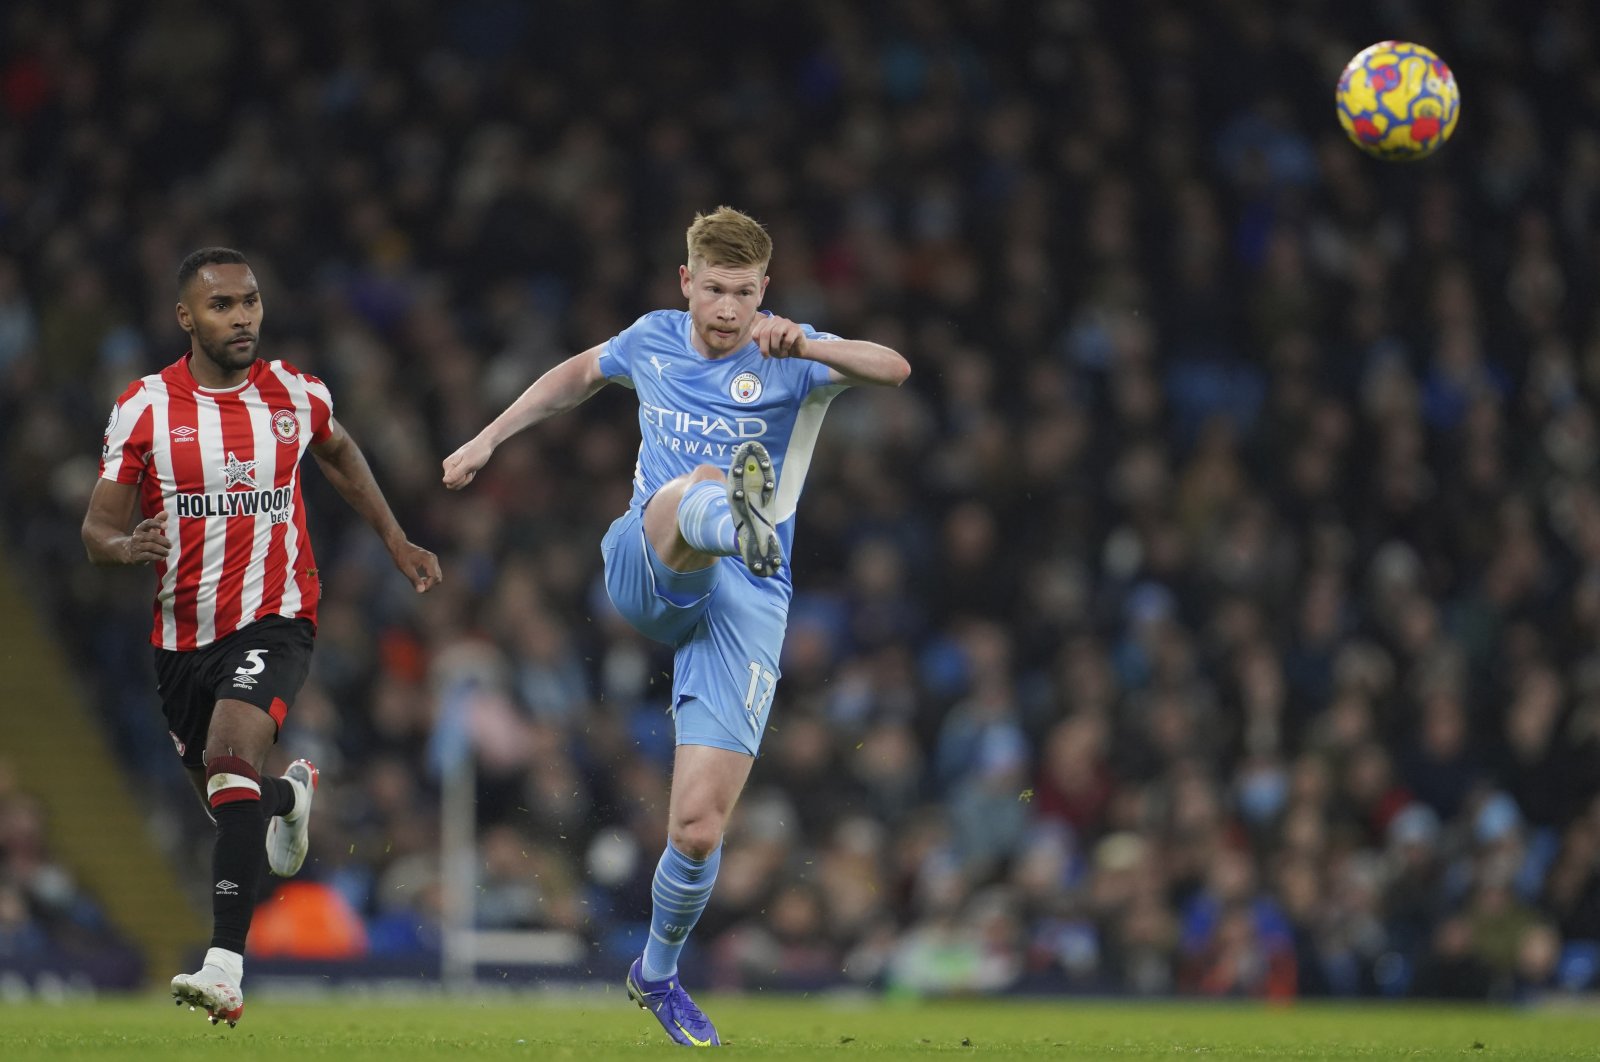 Manchester City&#039;s Kevin De Bruyne (C) in action during a Premier League match against Brentford, Manchester, England, Feb. 9, 2022. (AP Photo)